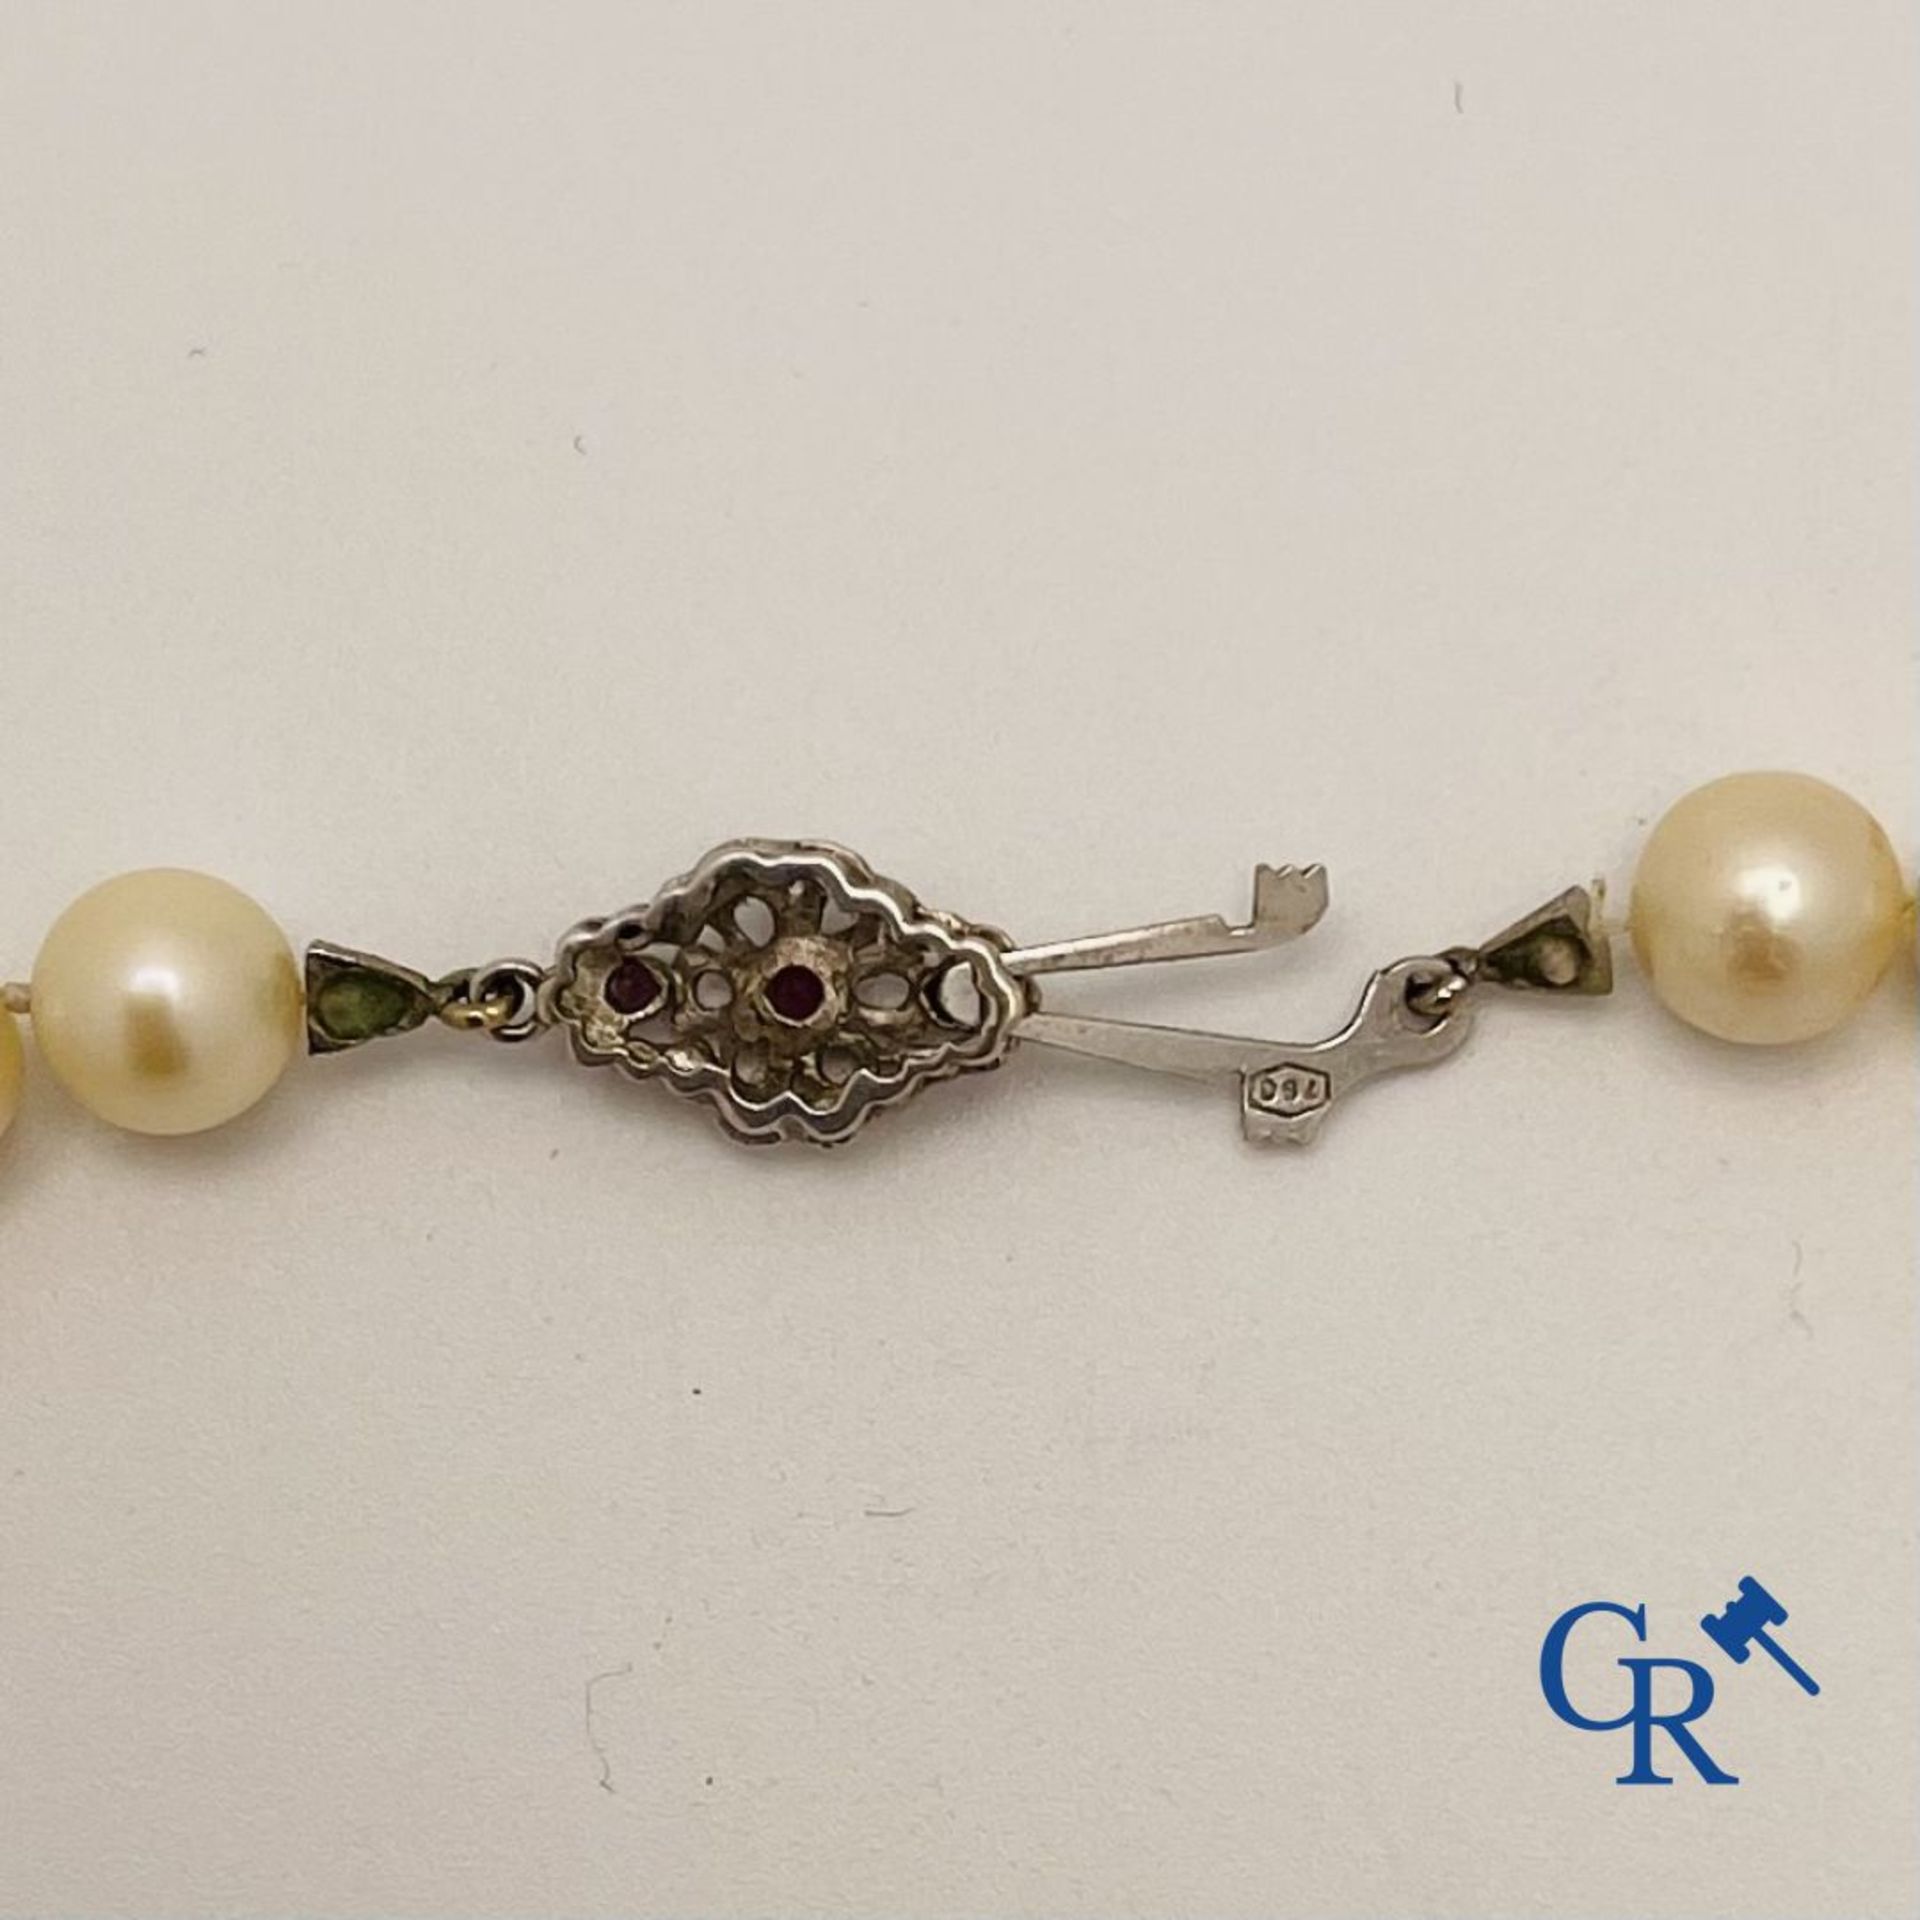 Jewel/Watches: Pearl necklace with clasp in white gold 18K and a women's pocket watch in gold 18K. - Bild 4 aus 7